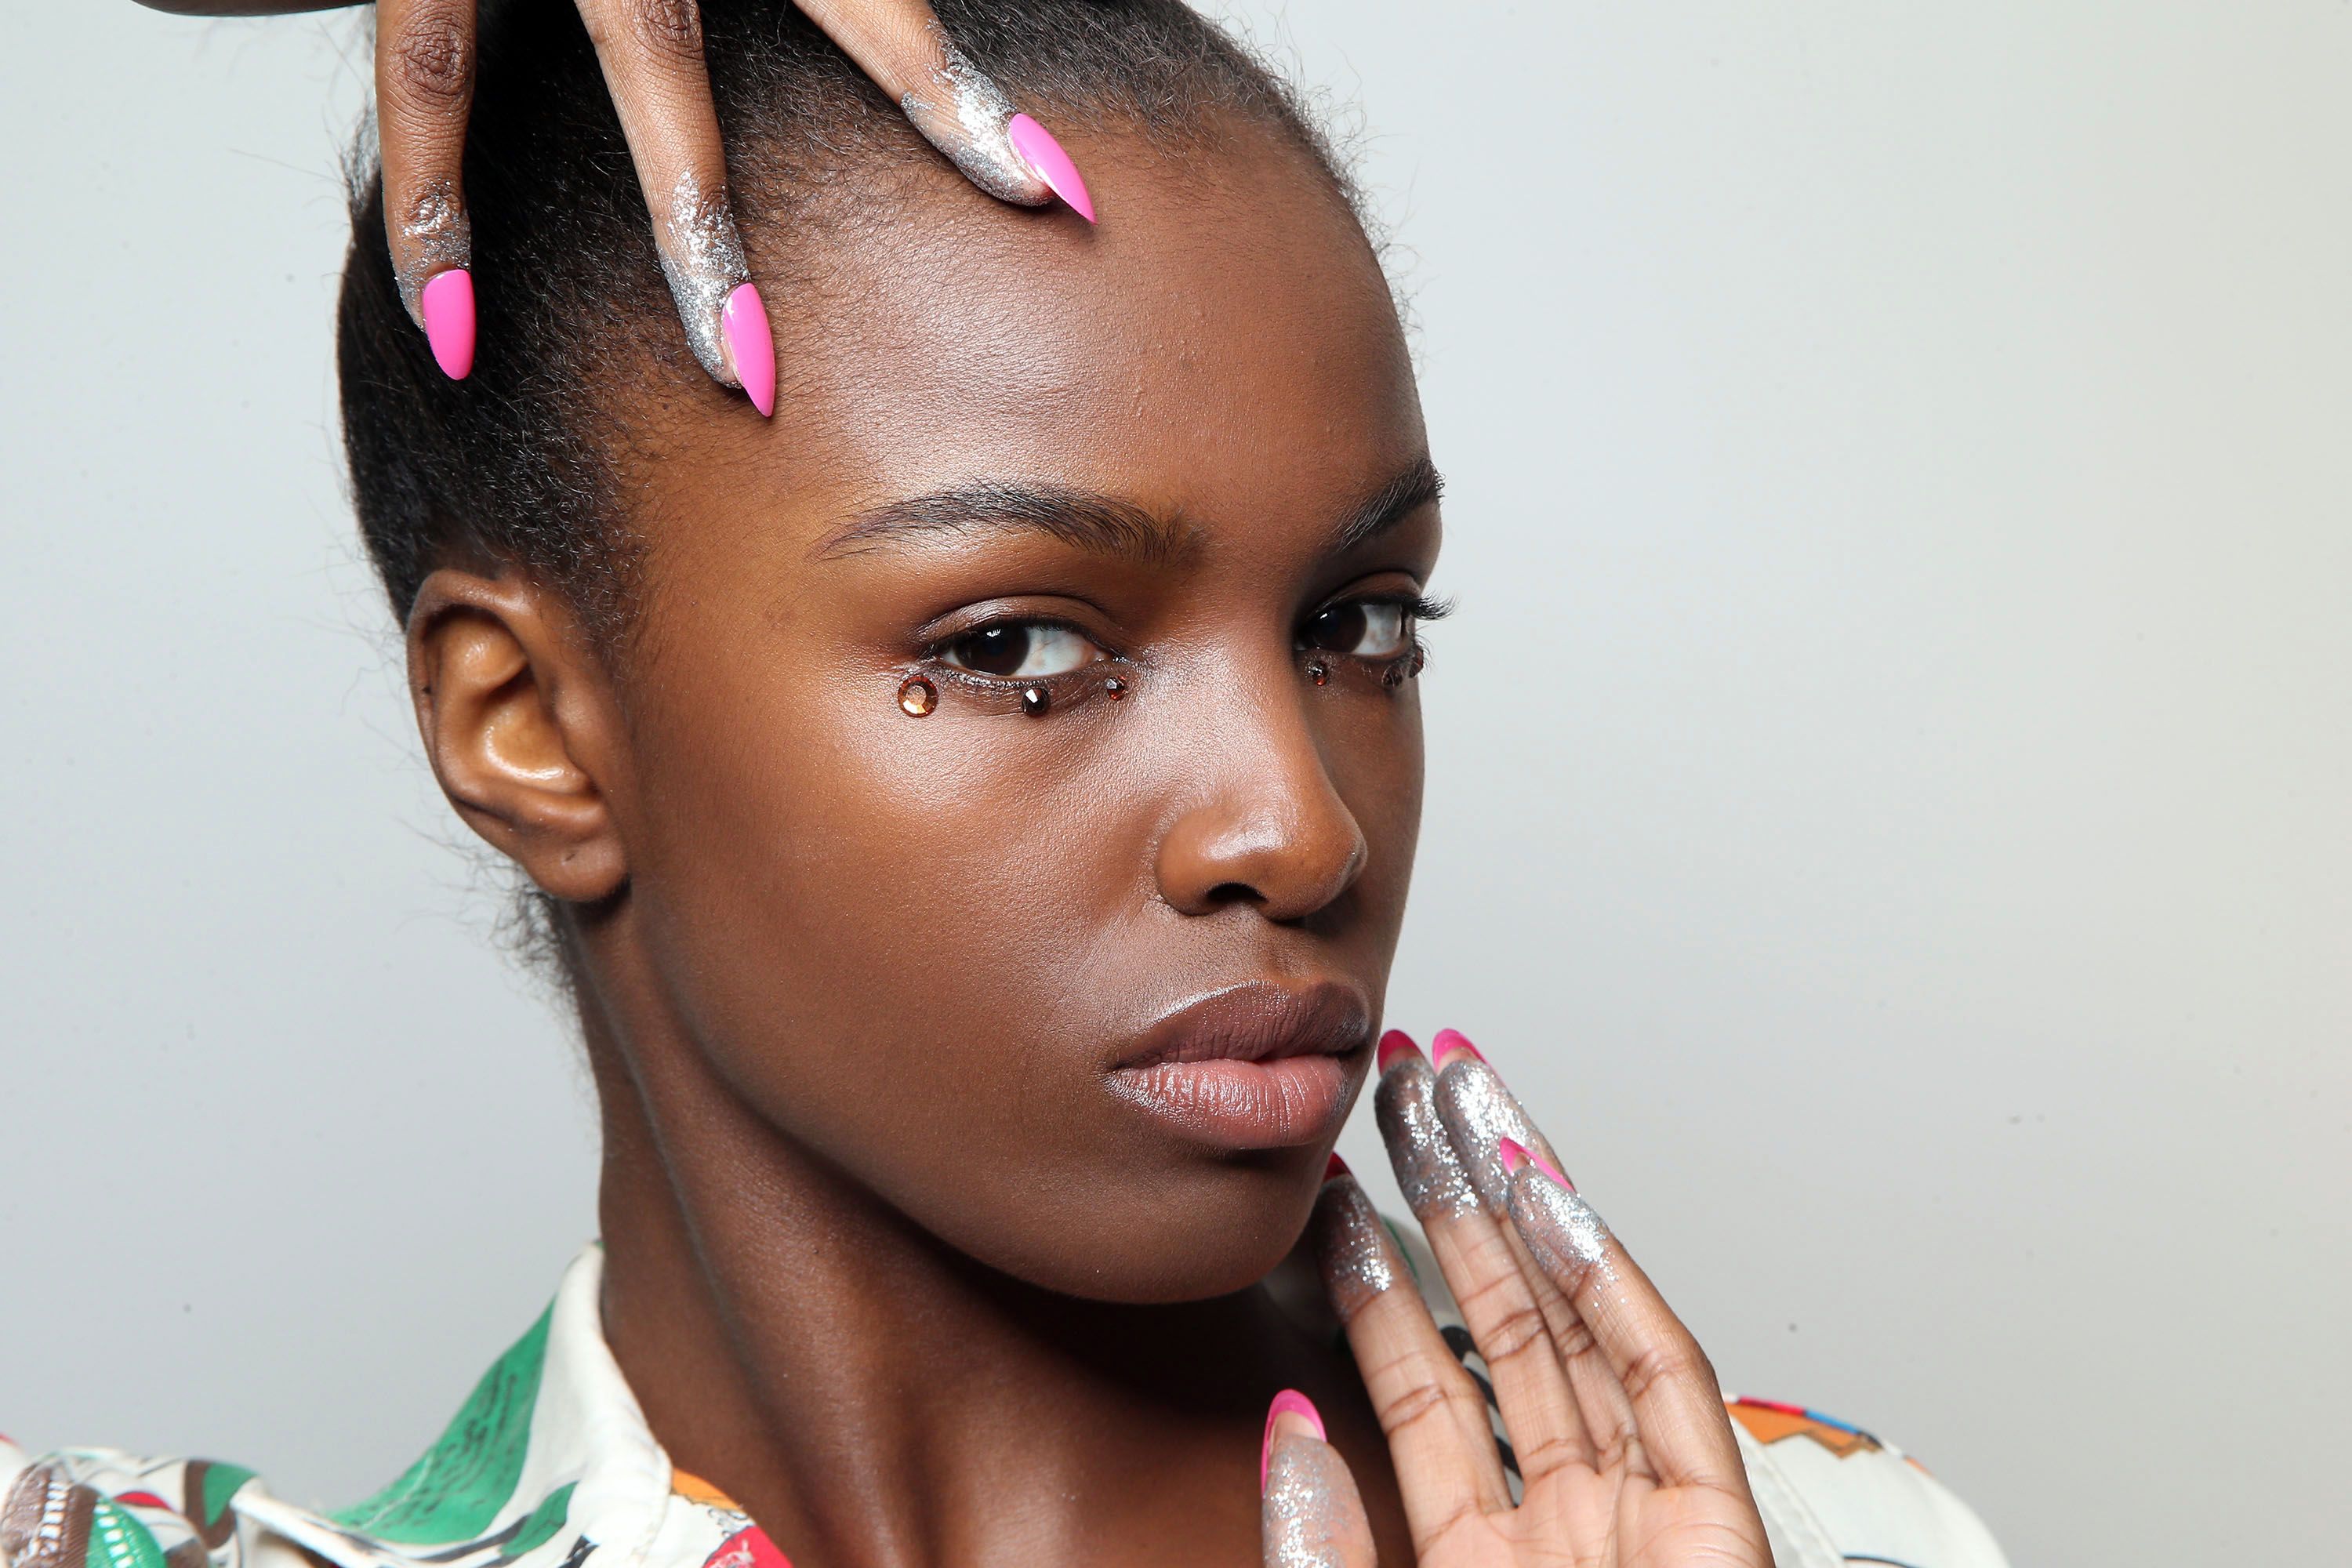 Makeup Trends You'll Want to Copy Spring 2018